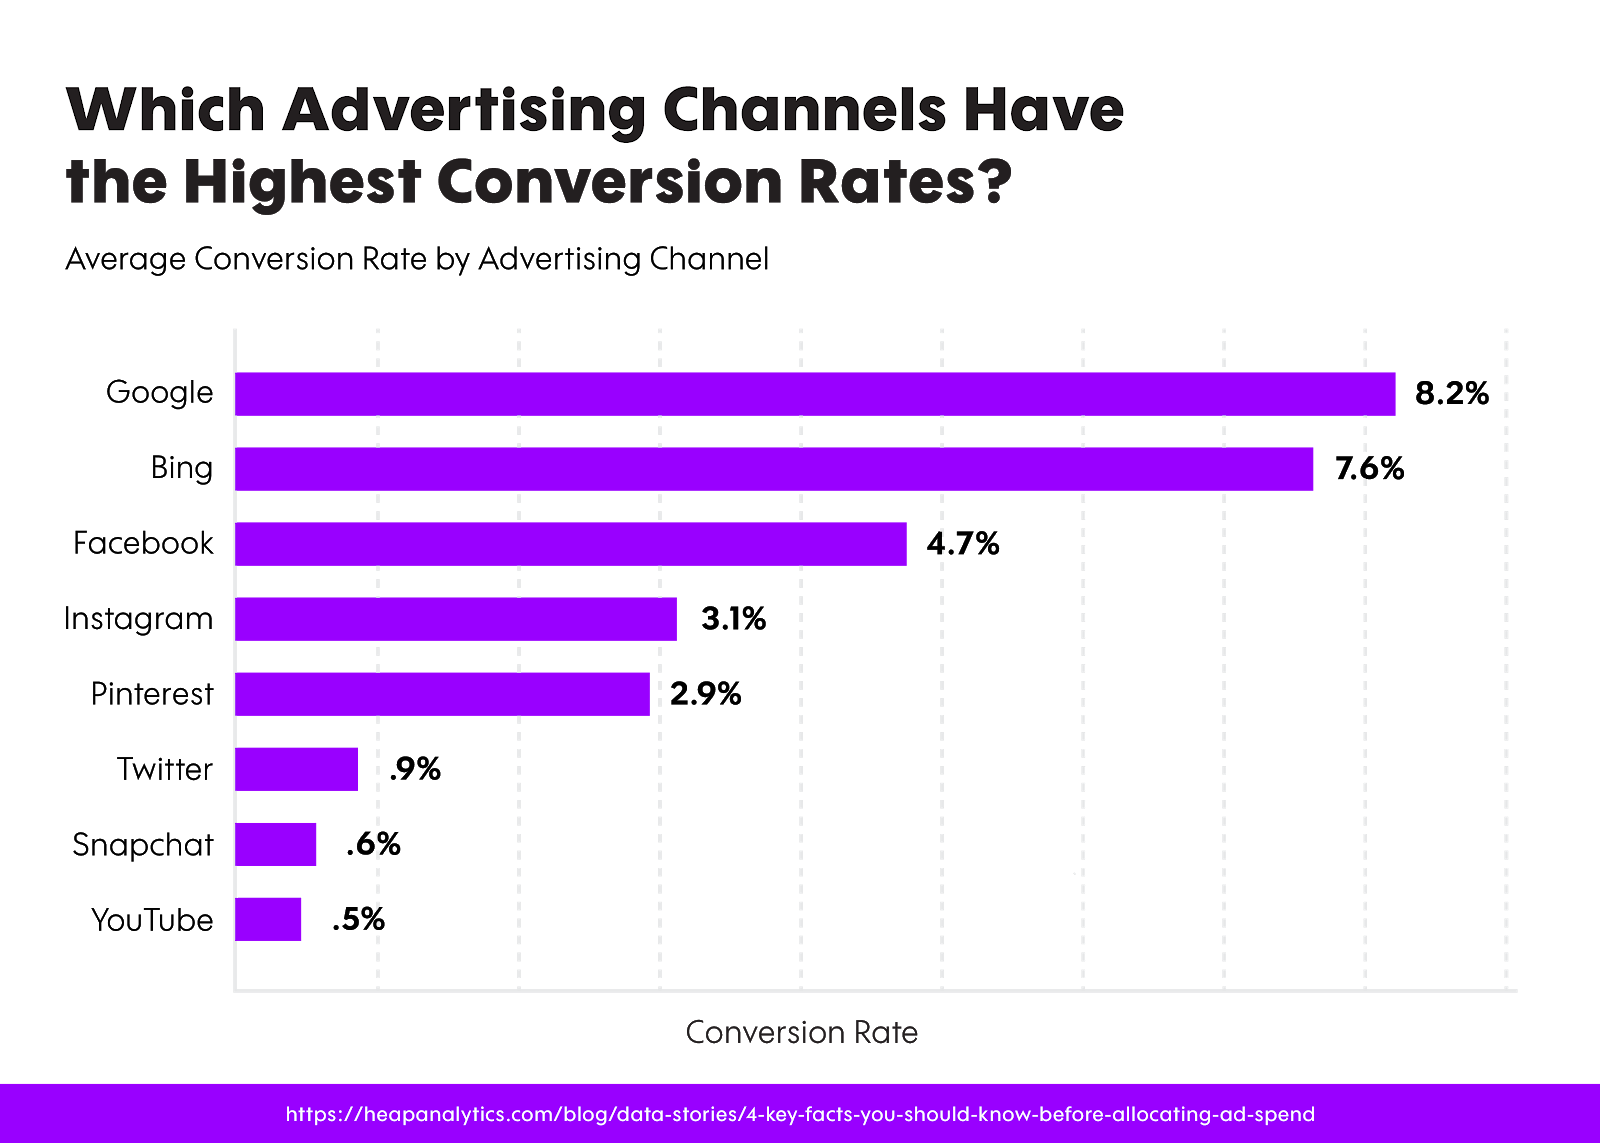 Average Conversion Rate by Advertising Channel